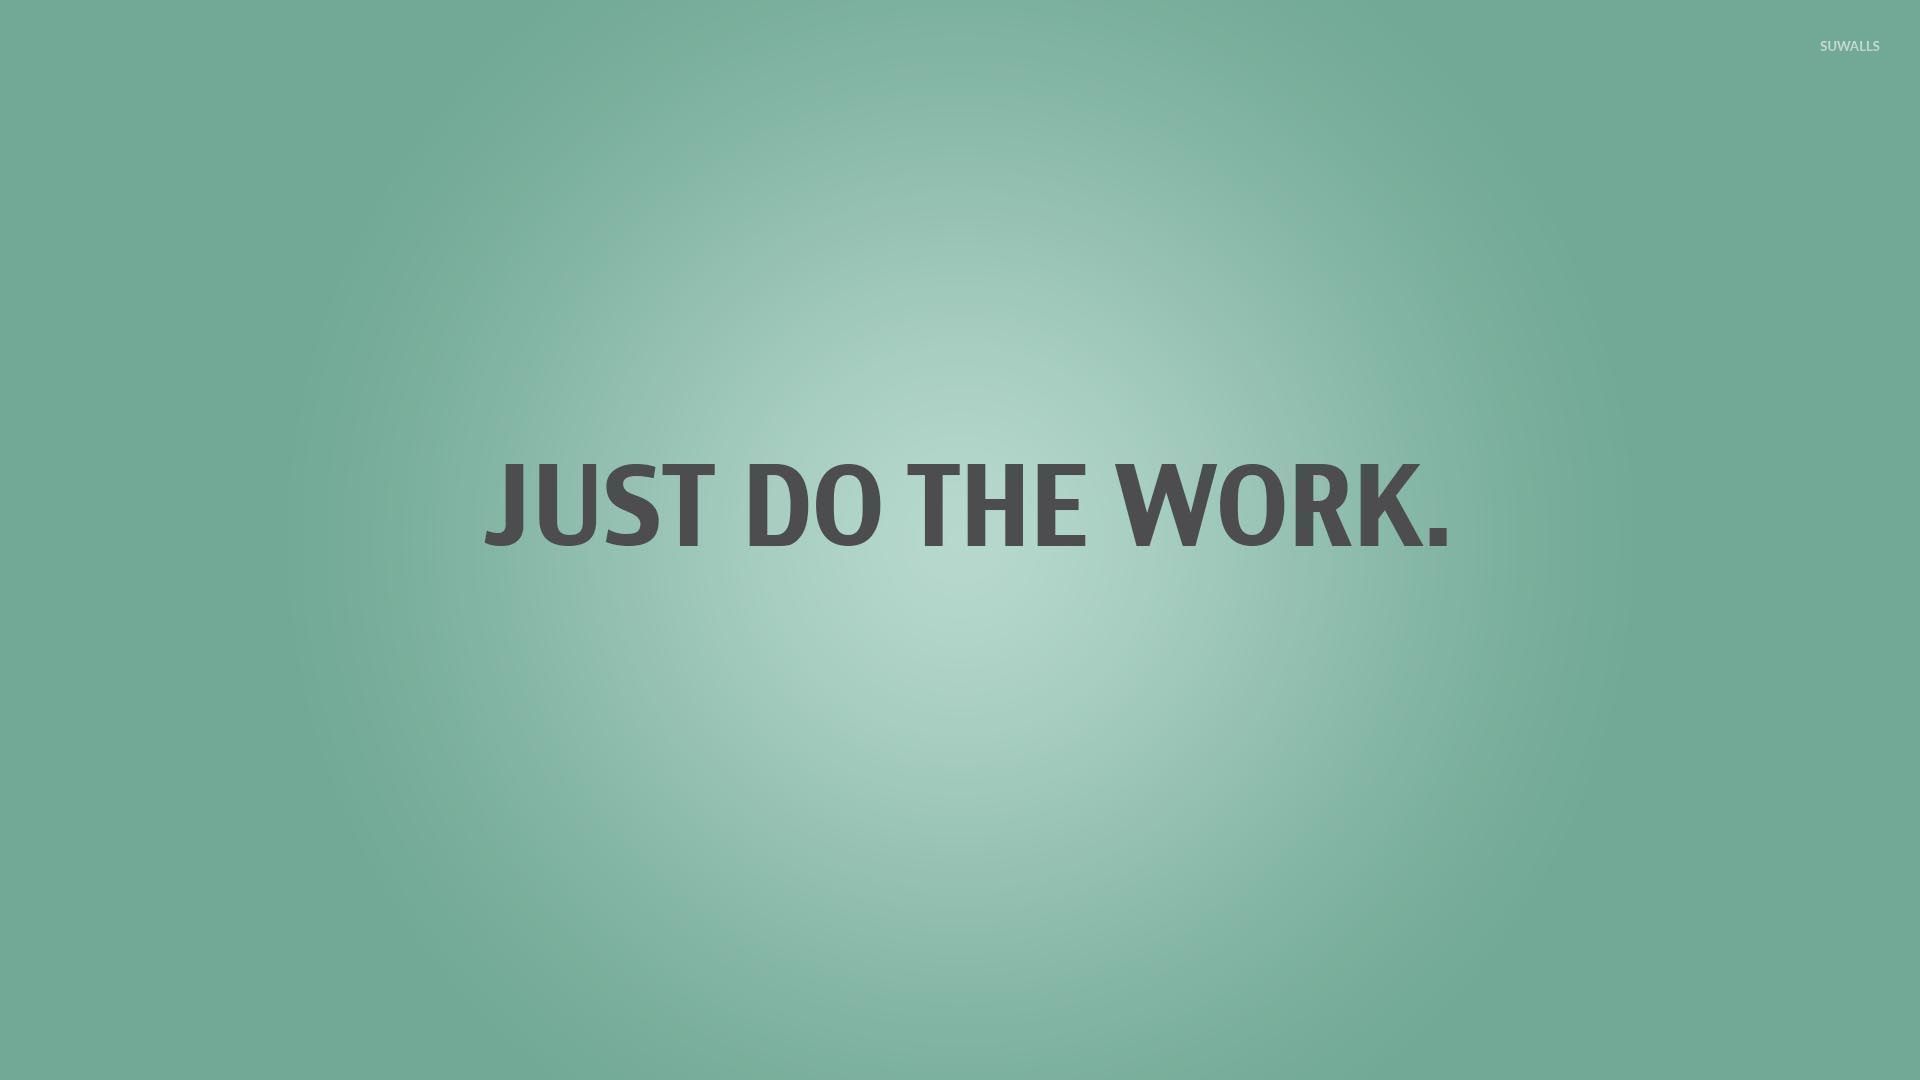 you should be working wallpaper,text,green,font,turquoise,logo